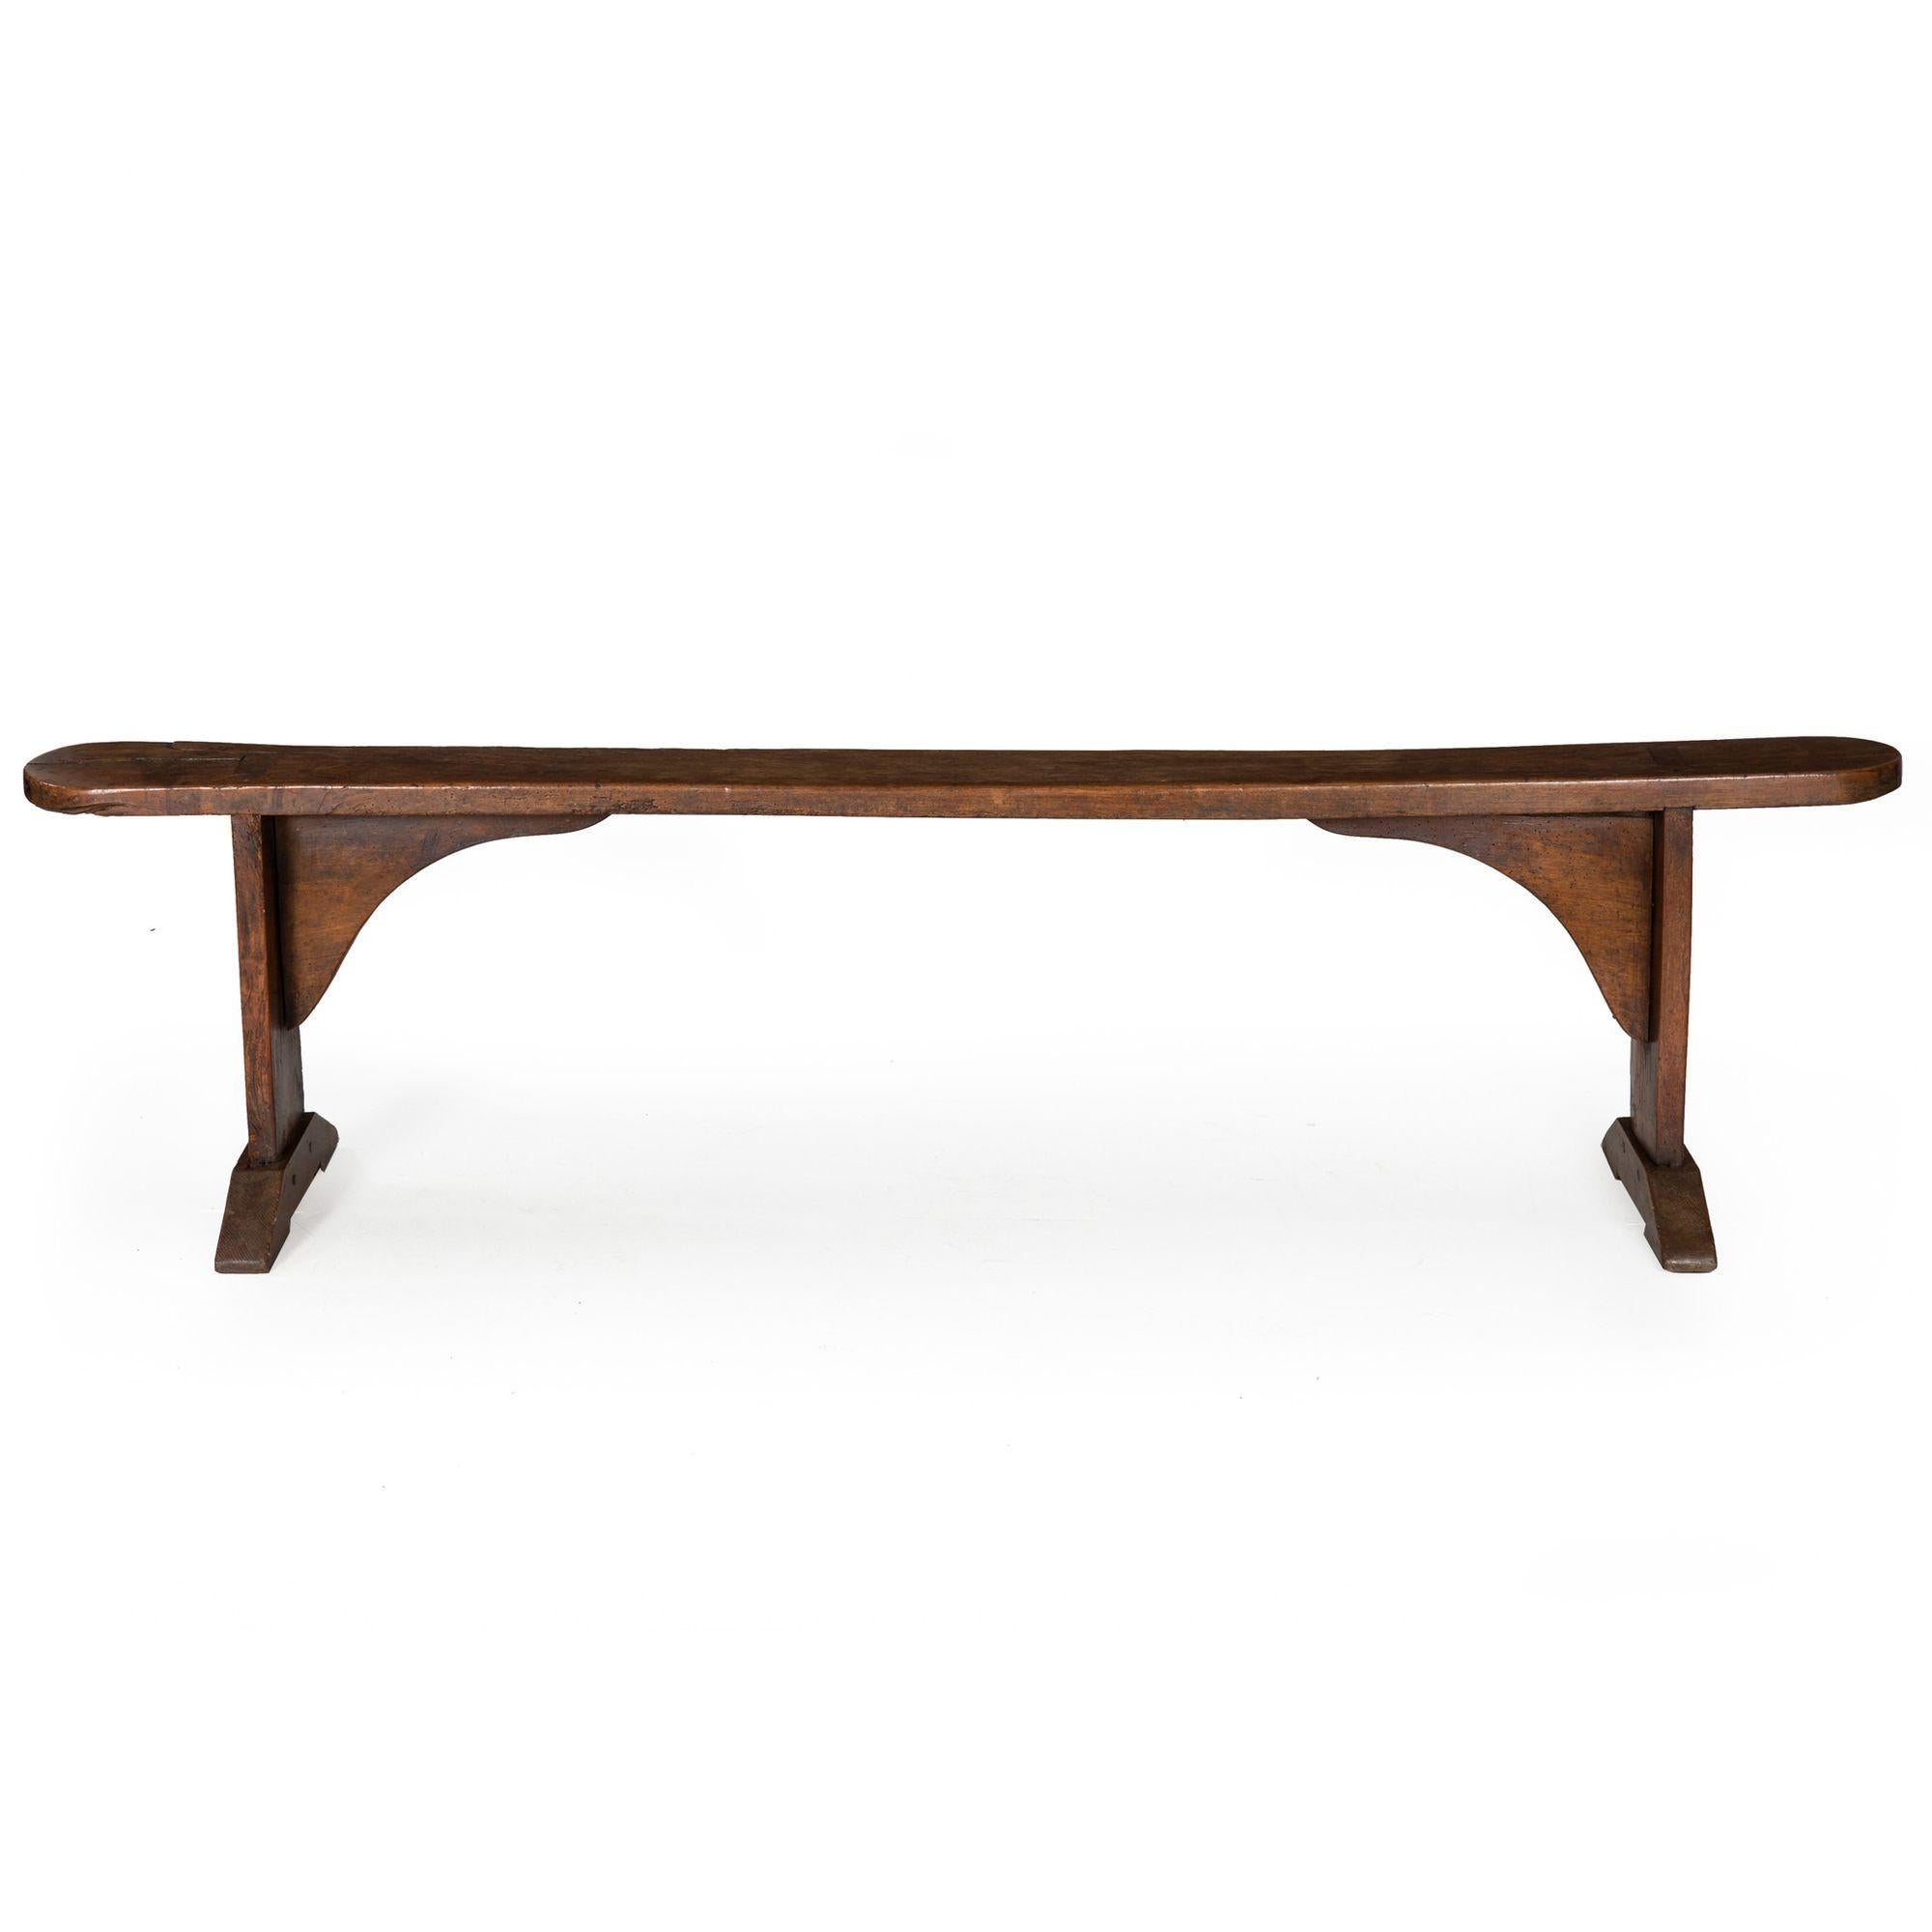 ENGLISH PATINATED ELM LONG TRESTLE BENCH
Two available  Circa 1750 with restorations
Item # 305TBP10L-1 

An incredibly beautiful bench, we acquired this as part of a pair (the other possibly still available in our inventory under item #